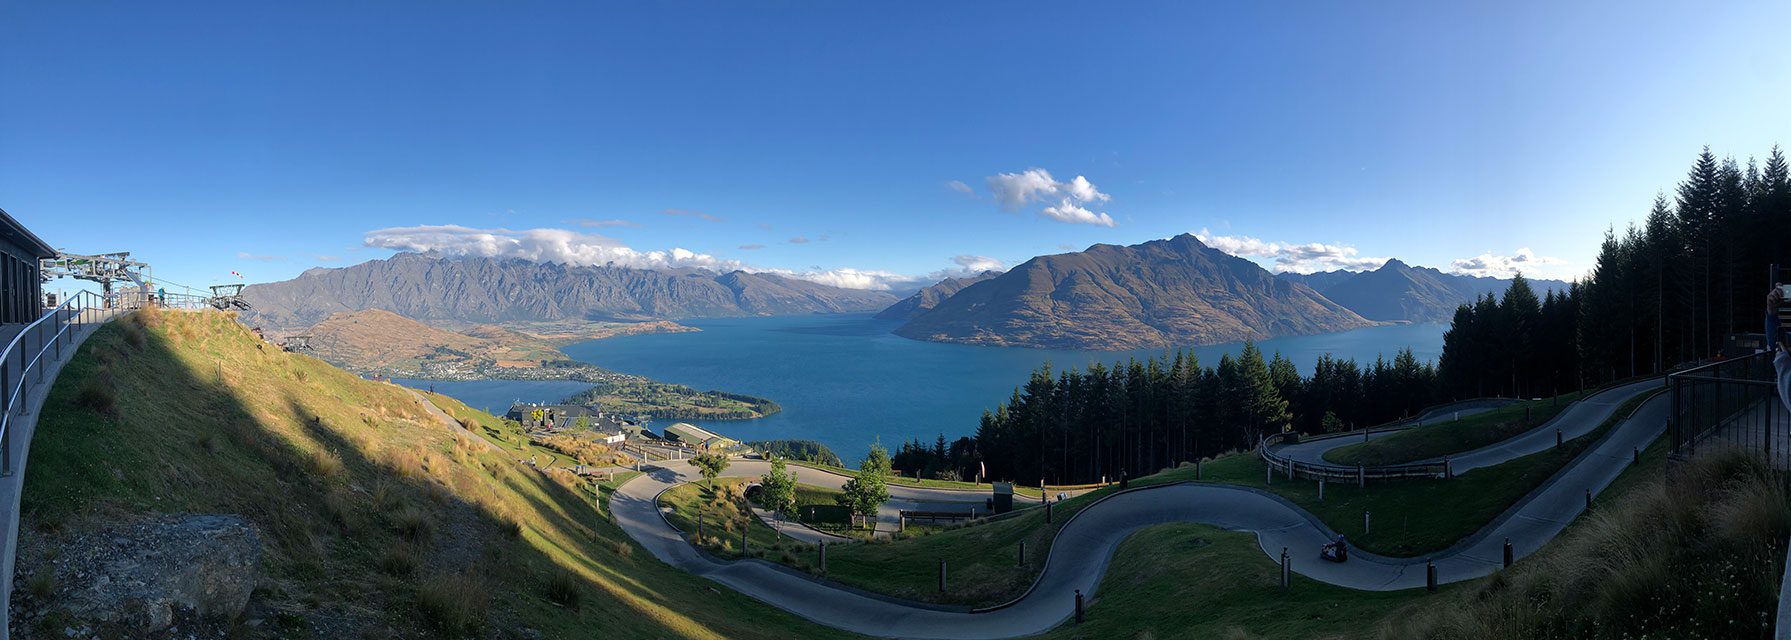 Views from the luge track atop the Queenstown Gondola